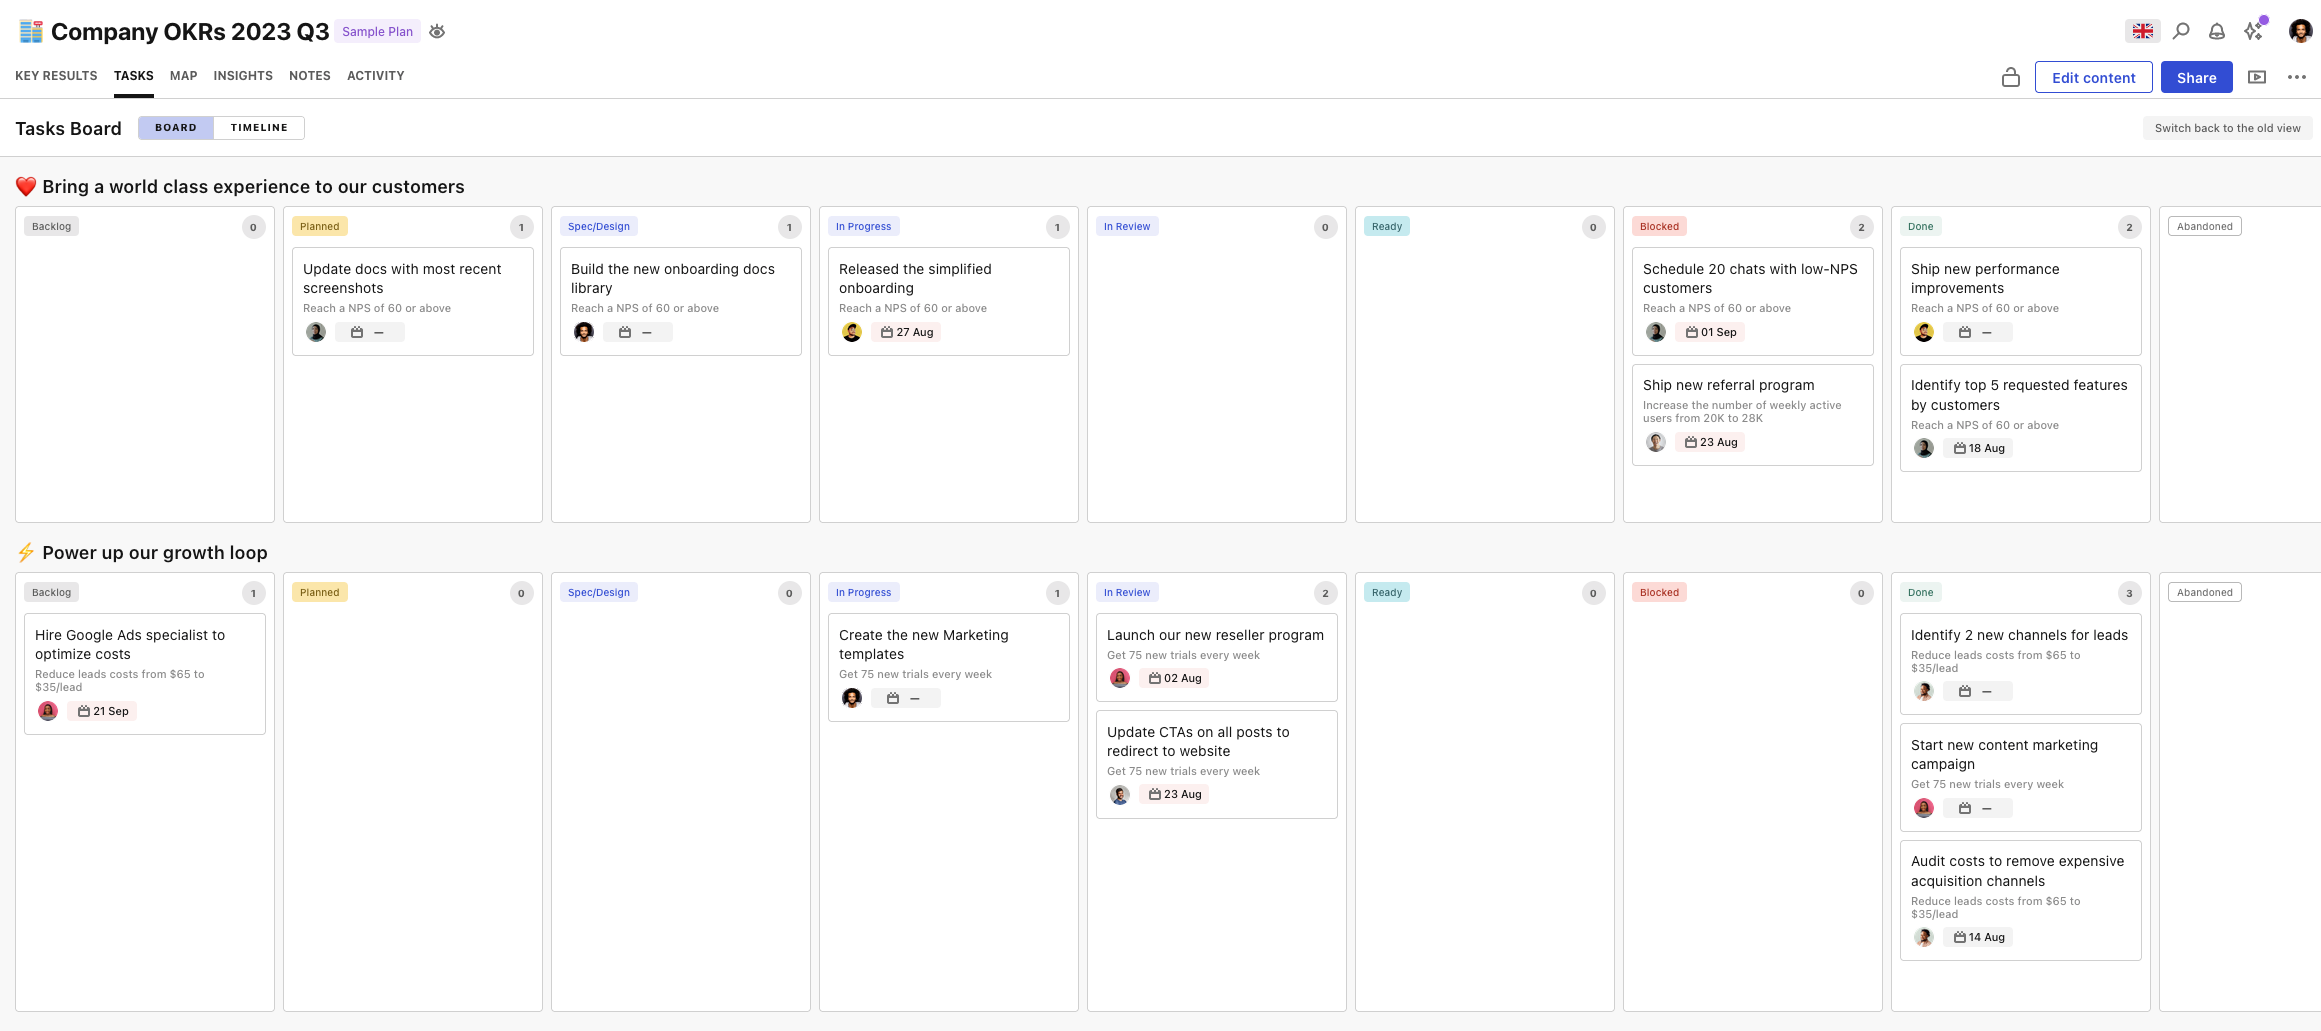 Updated Kanban view — manage projects based on status